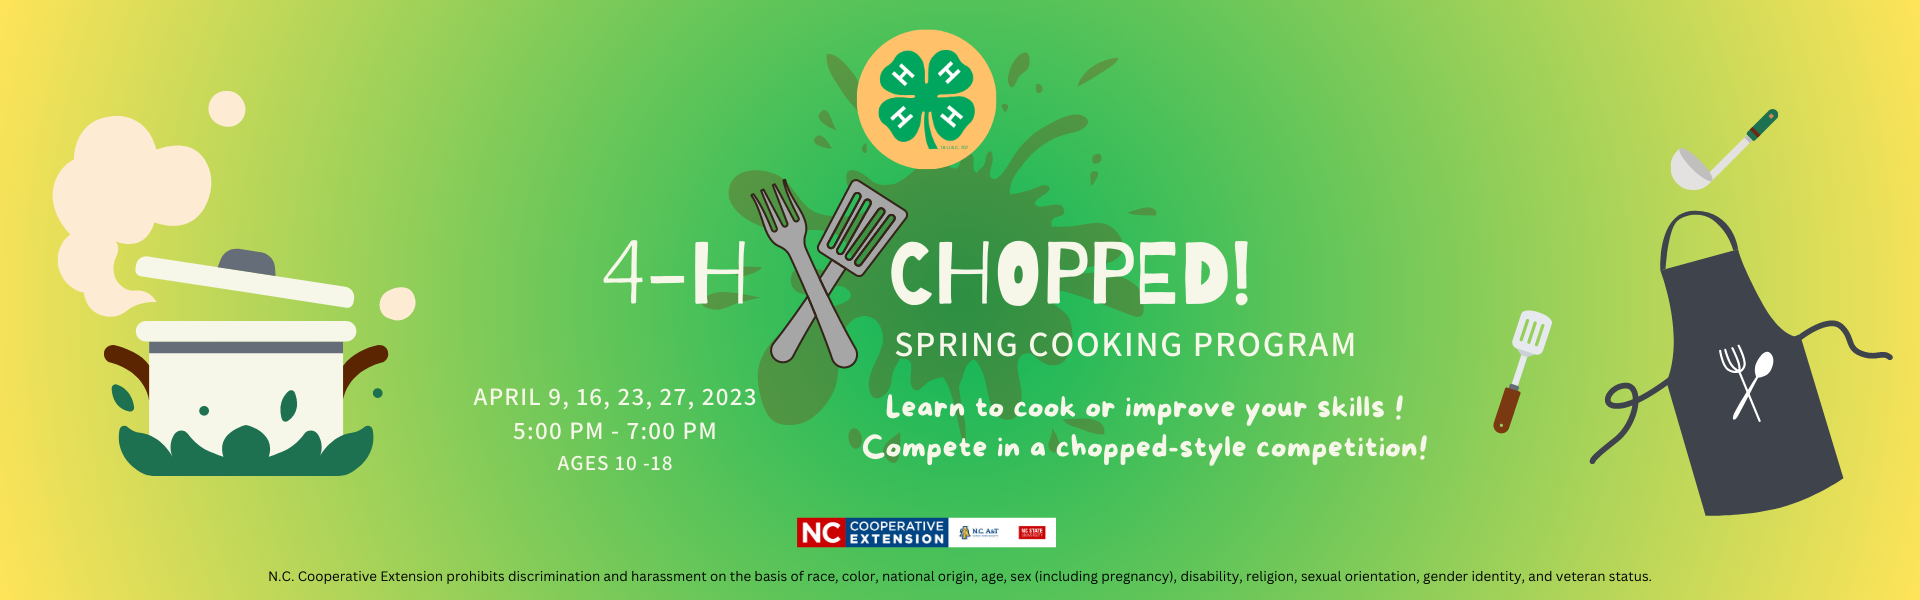 Header image of cooking utensils and 4-H logo. Info on image is in body of page